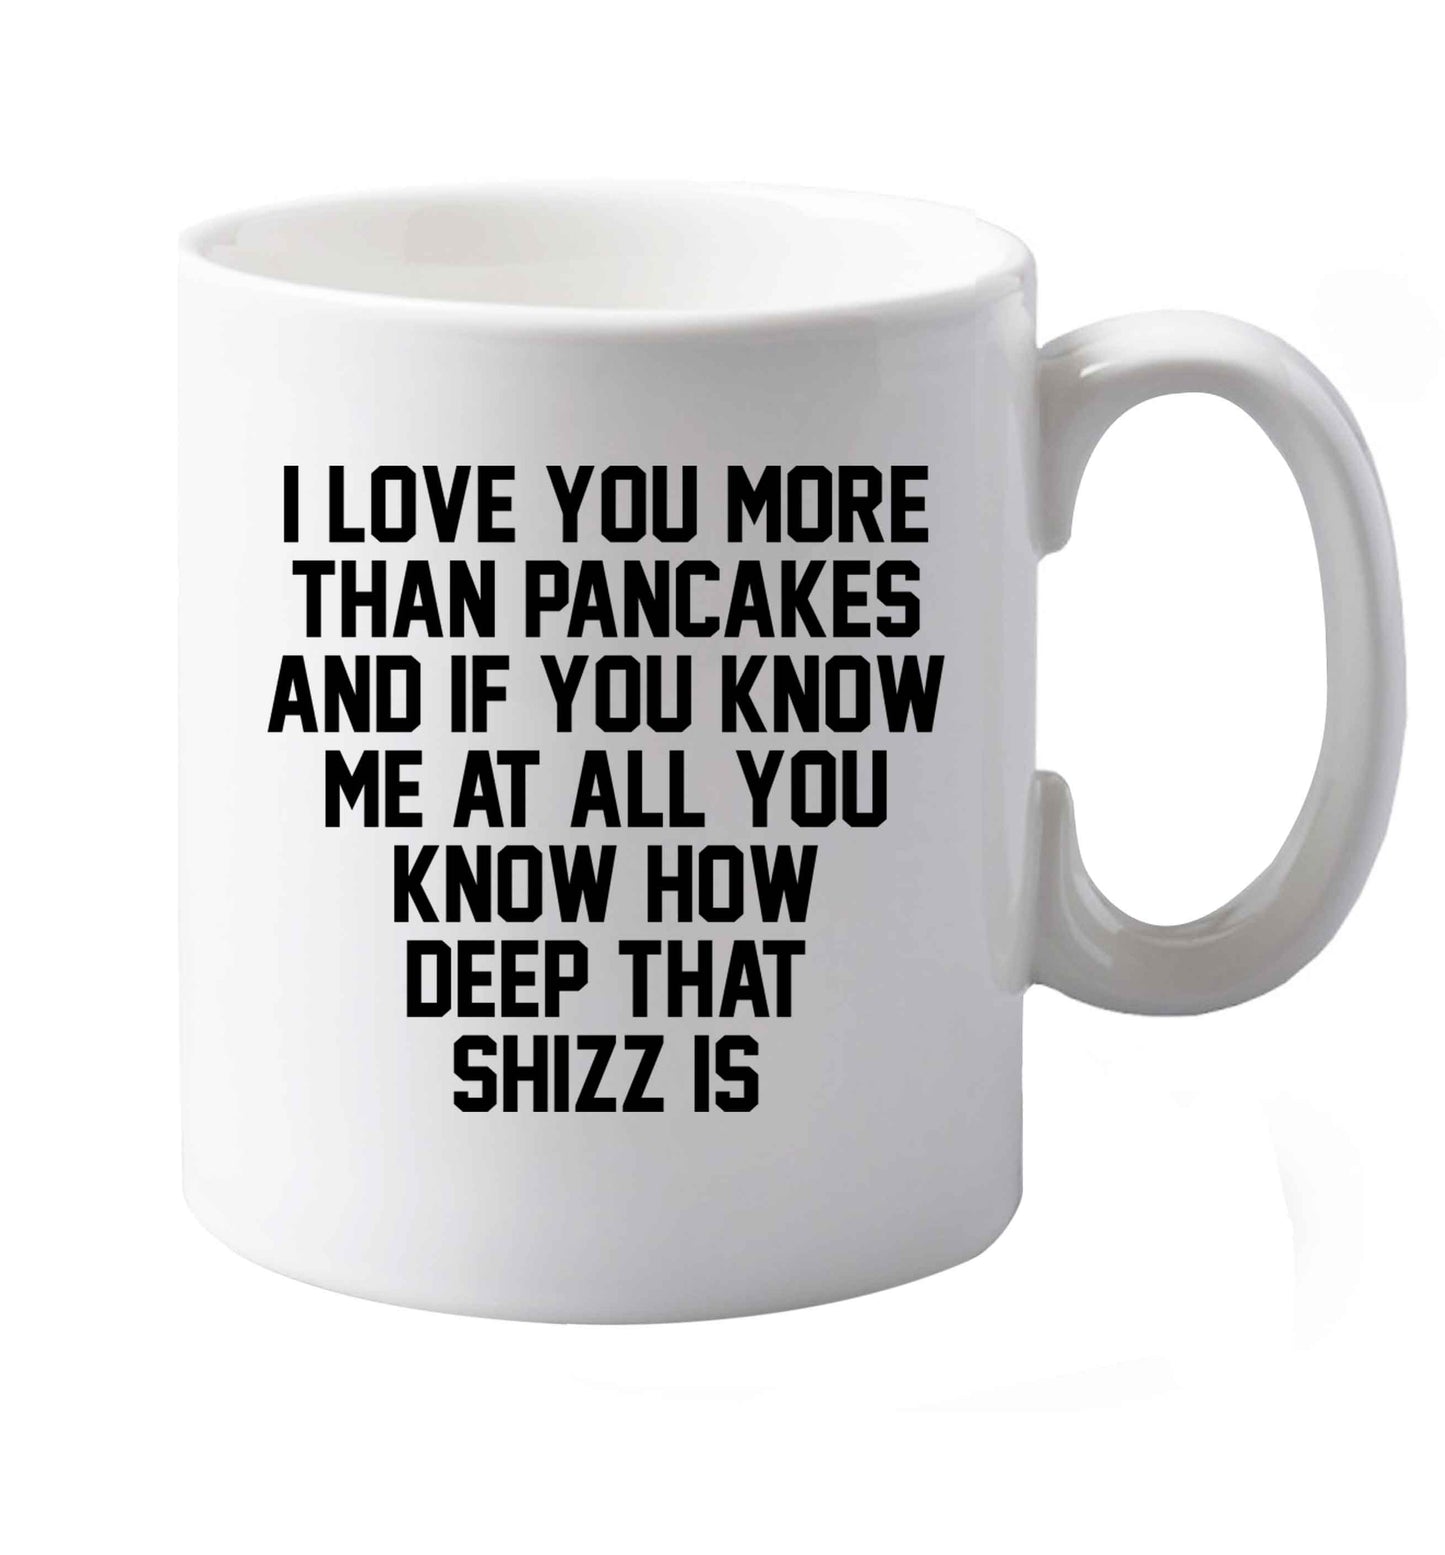 10 oz I love you more than pancakes and if you know me at all you know how deep that shizz is ceramic mug both sides